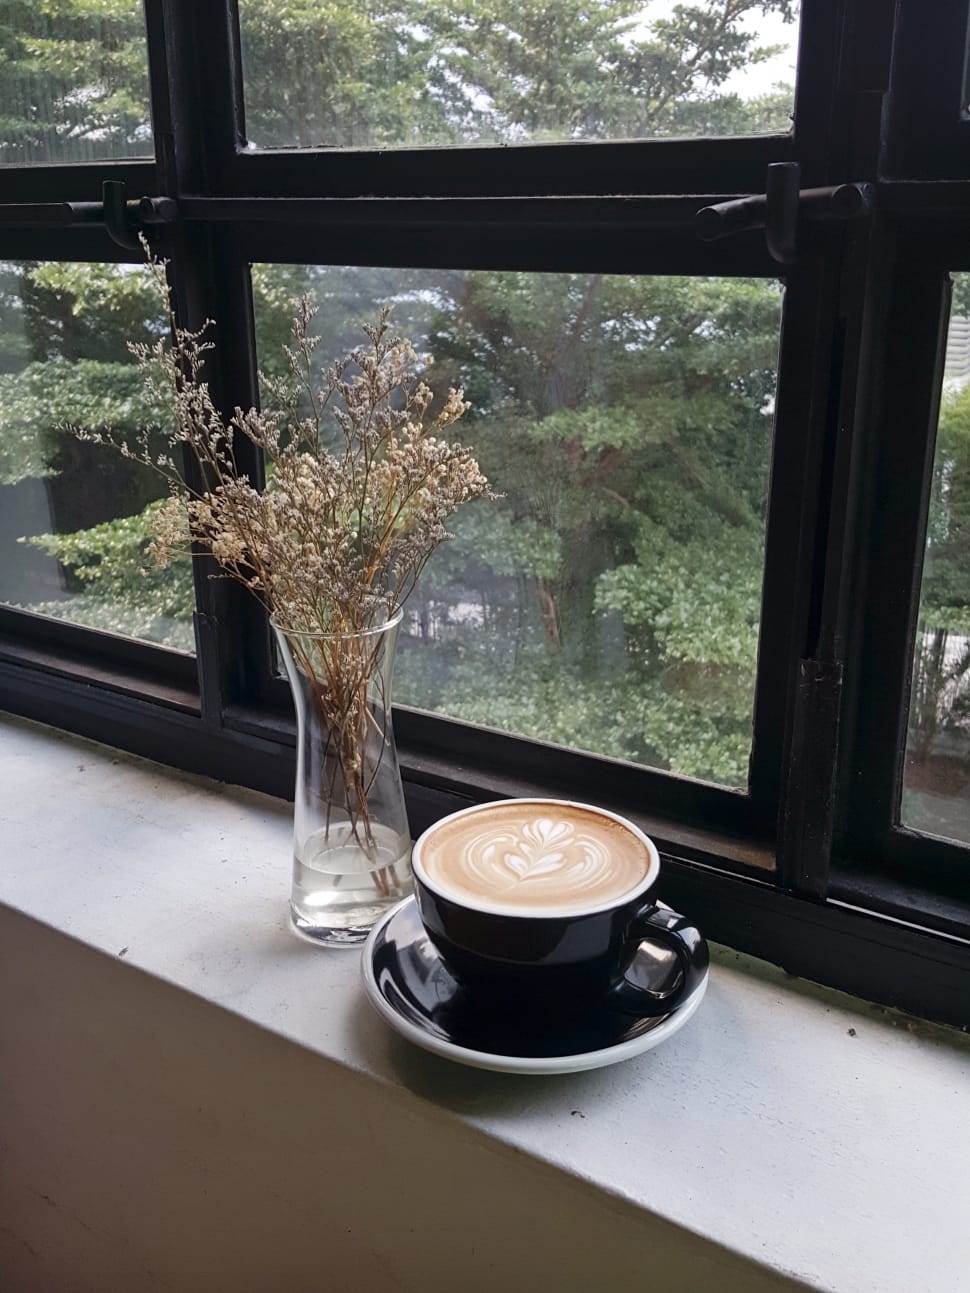 black ceramic mug filled with cappuccino coffee with saucer beside a clear glass flower vase and black wooden framed window preview